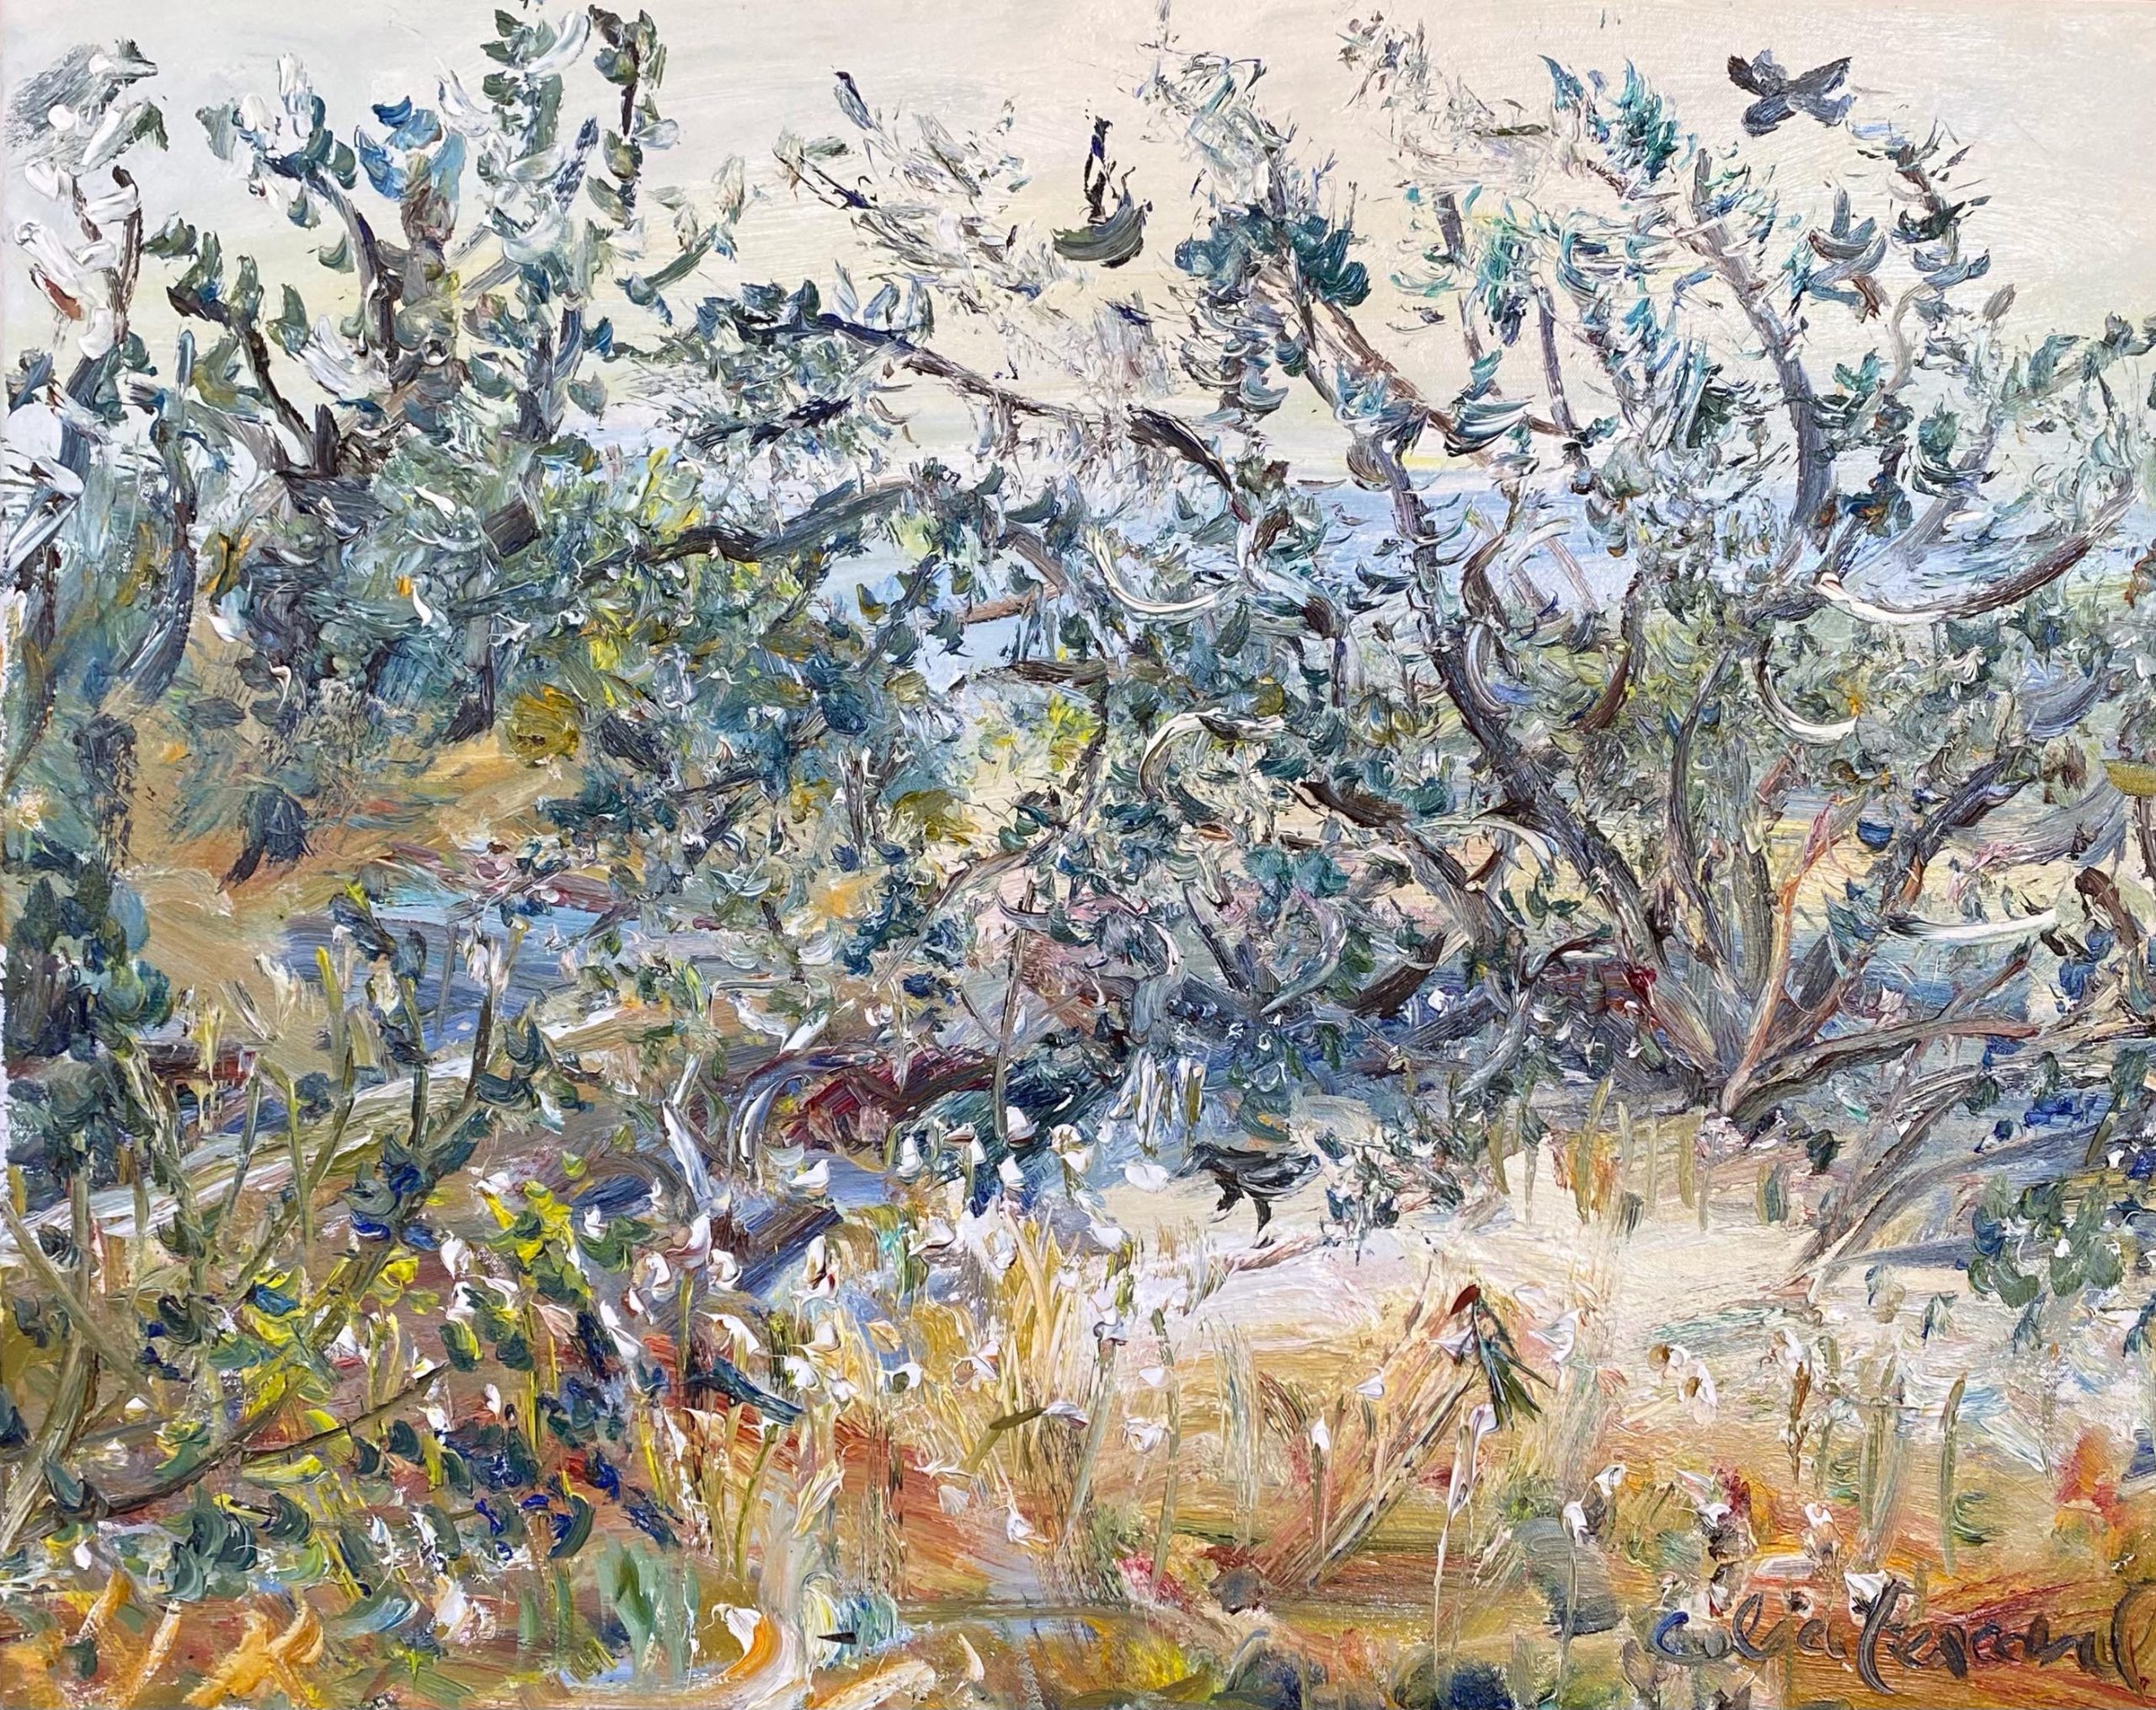 Celia Perceval 'Raven in the Bunnytails at Merrick's Beach' oil on canvas 61 x 75cm $10,000